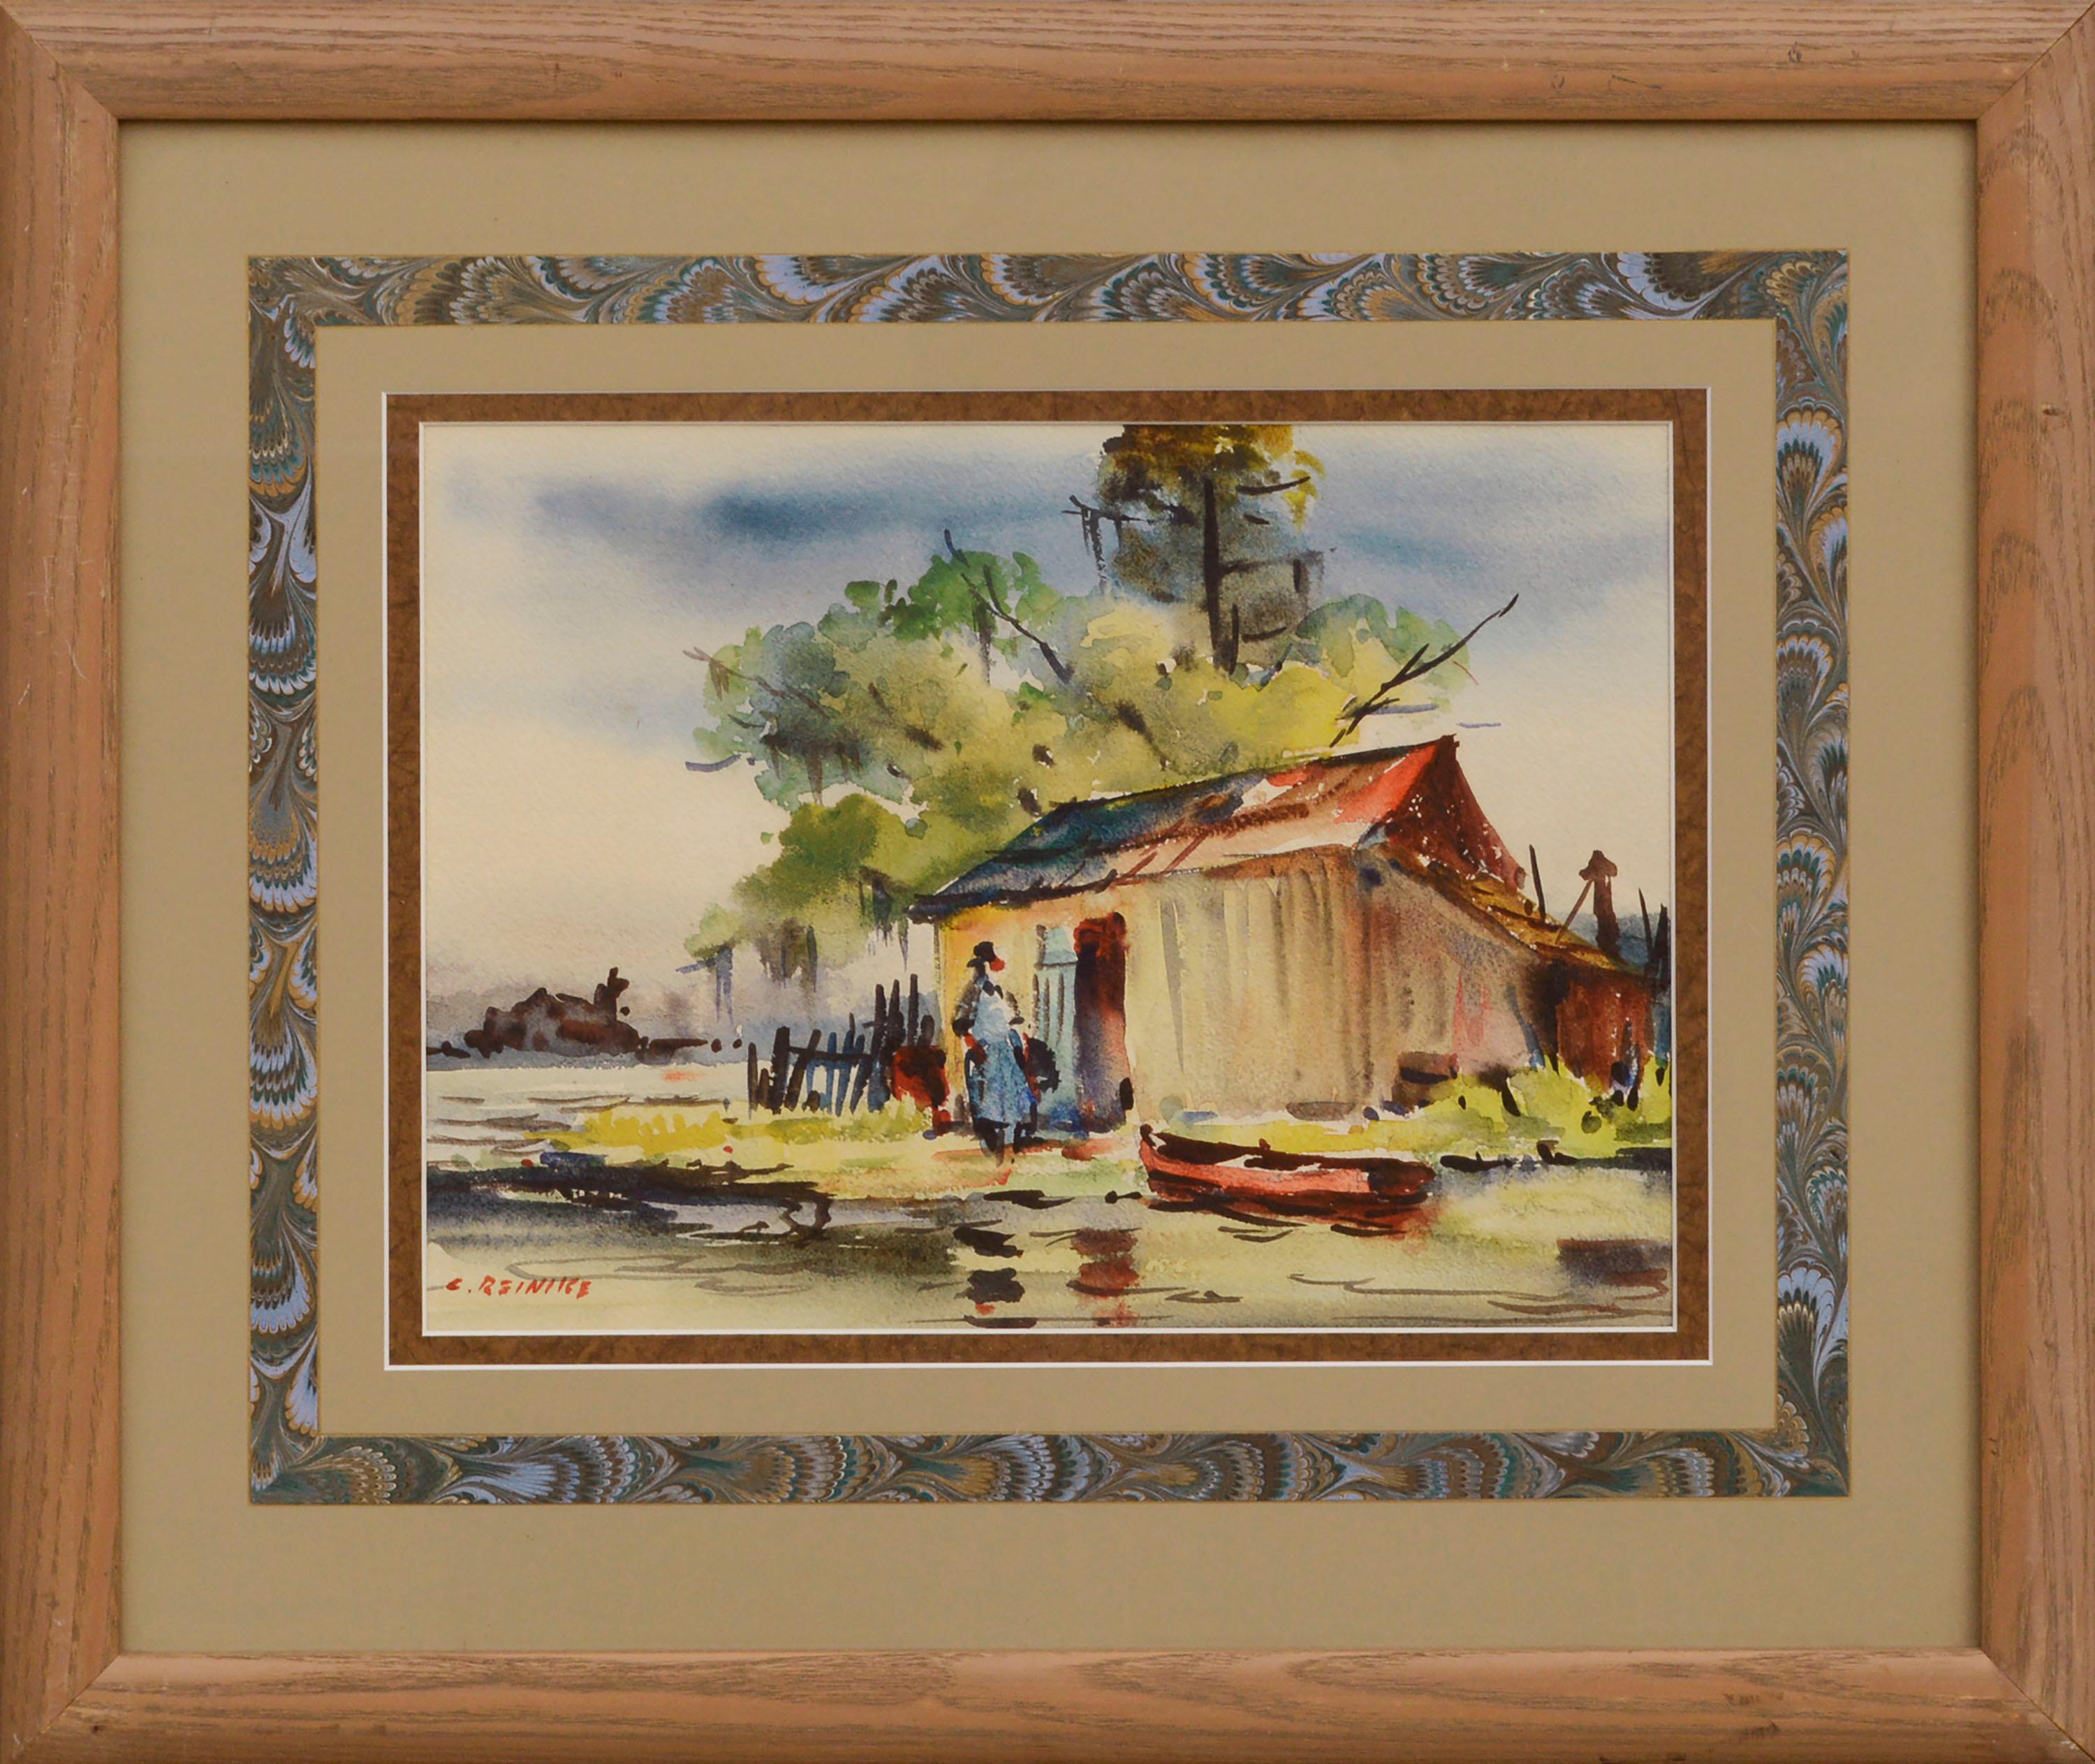 Vibrant landscape watercolor of a figure and small boat next to a cabin on the bayou by New Orleans artist Charles Reinike (Sr.) (American, 1906-1983). Signed "C. Reinike" lower left. Presented in a tan mat with paisley detail and rustic wood frame.